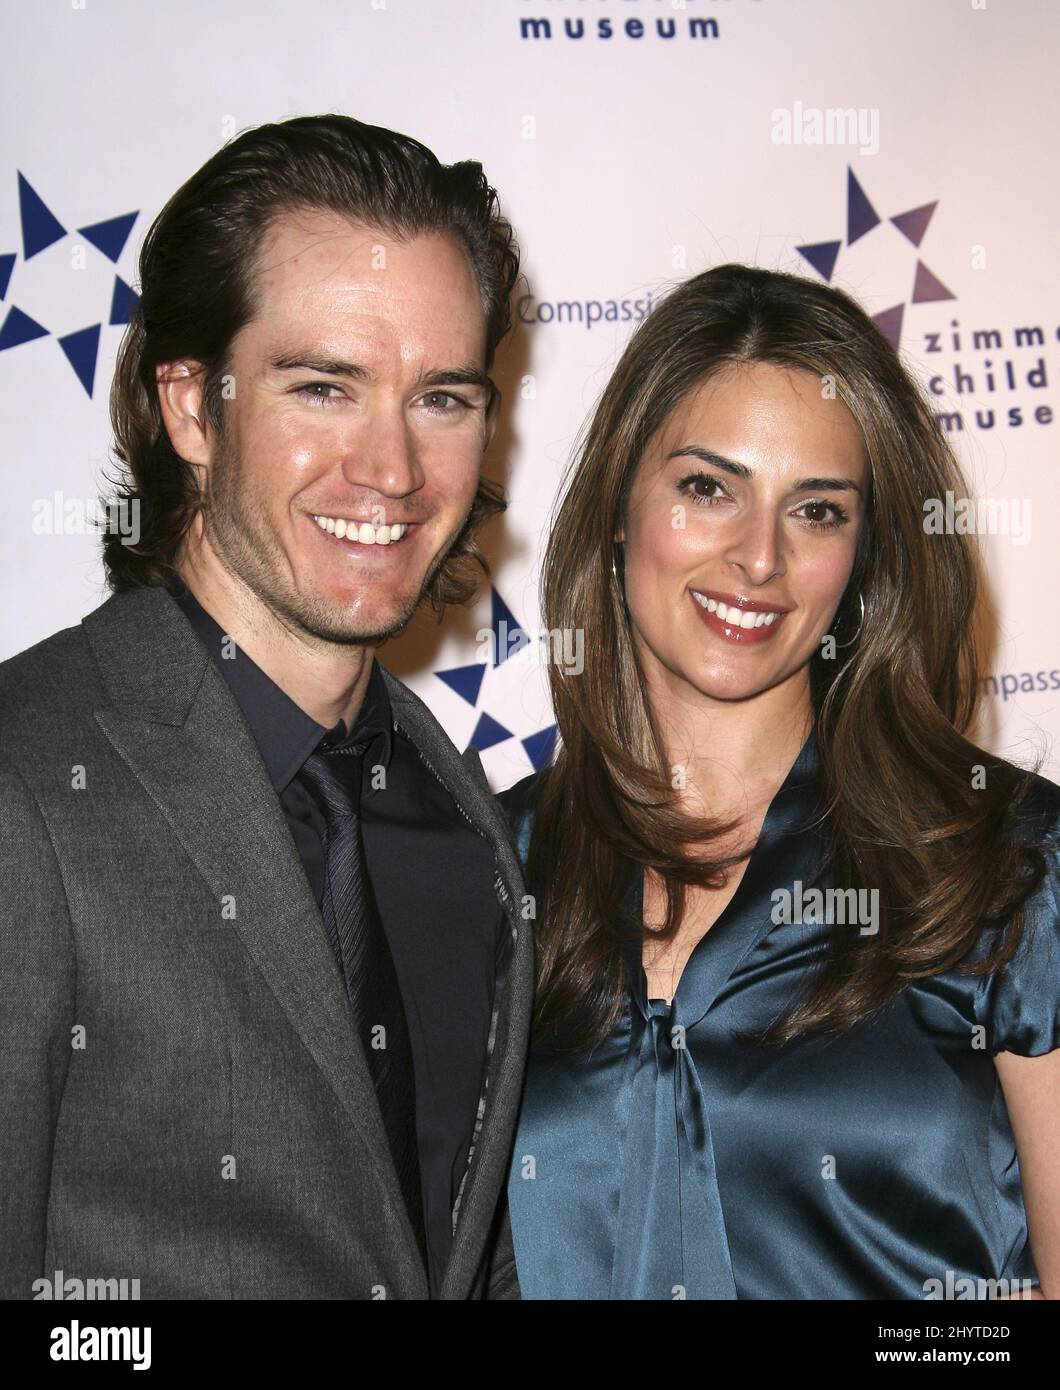 Mark-Paul Gosselaar and wife Lisa Ann Russell at the Zimmer Children's Museum 8th Annual Discovery Awards Dinner held at the Beverly Hills Hotel. Stock Photo